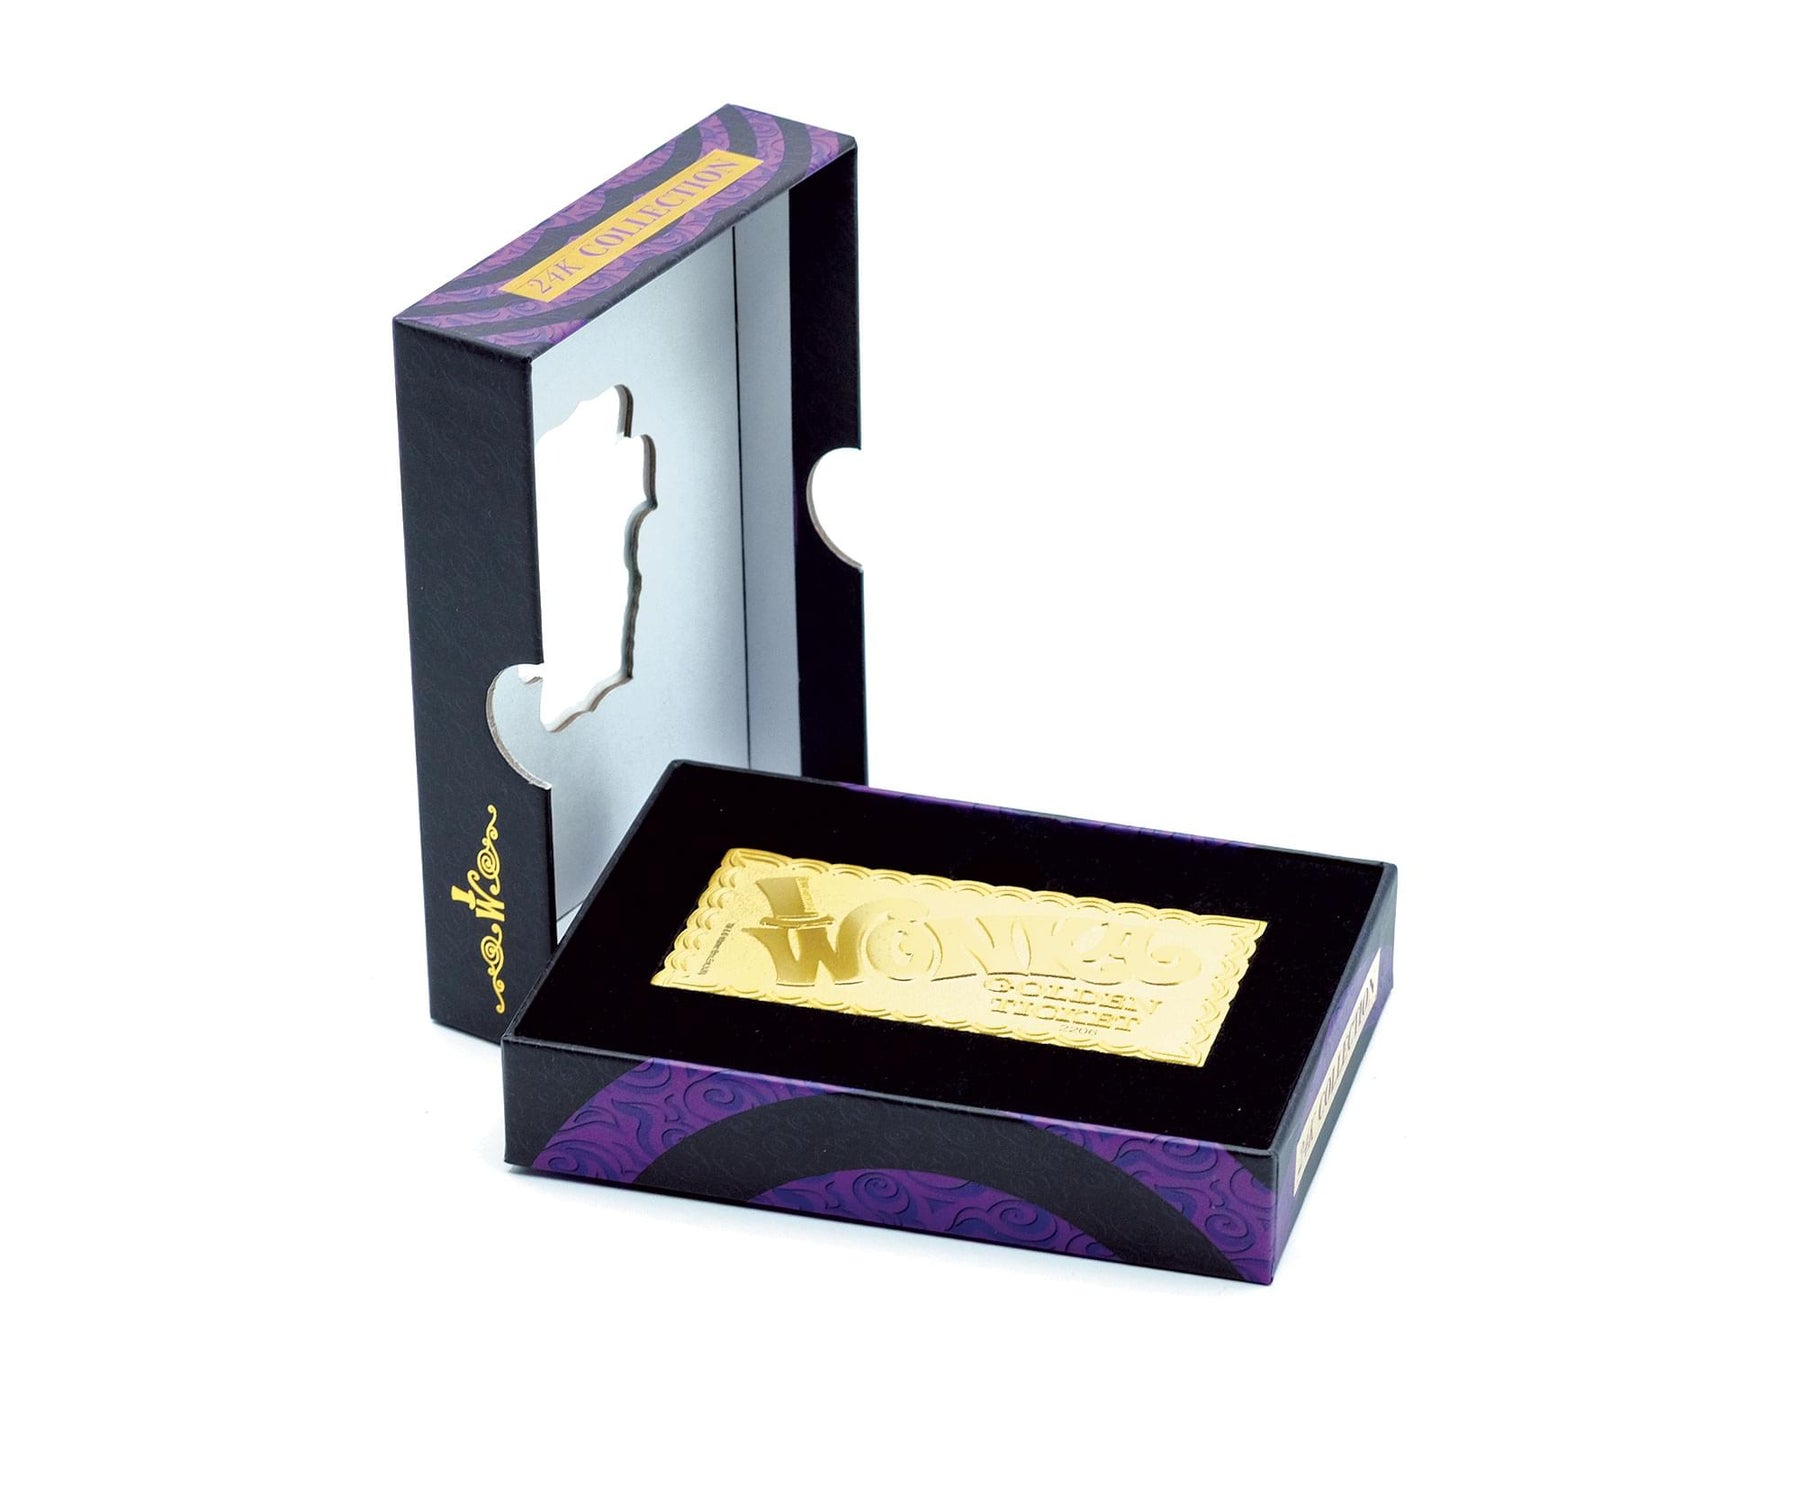 Willy Wonka 24K Mini Gold Plated Golden Ticket Limited Edition Replica